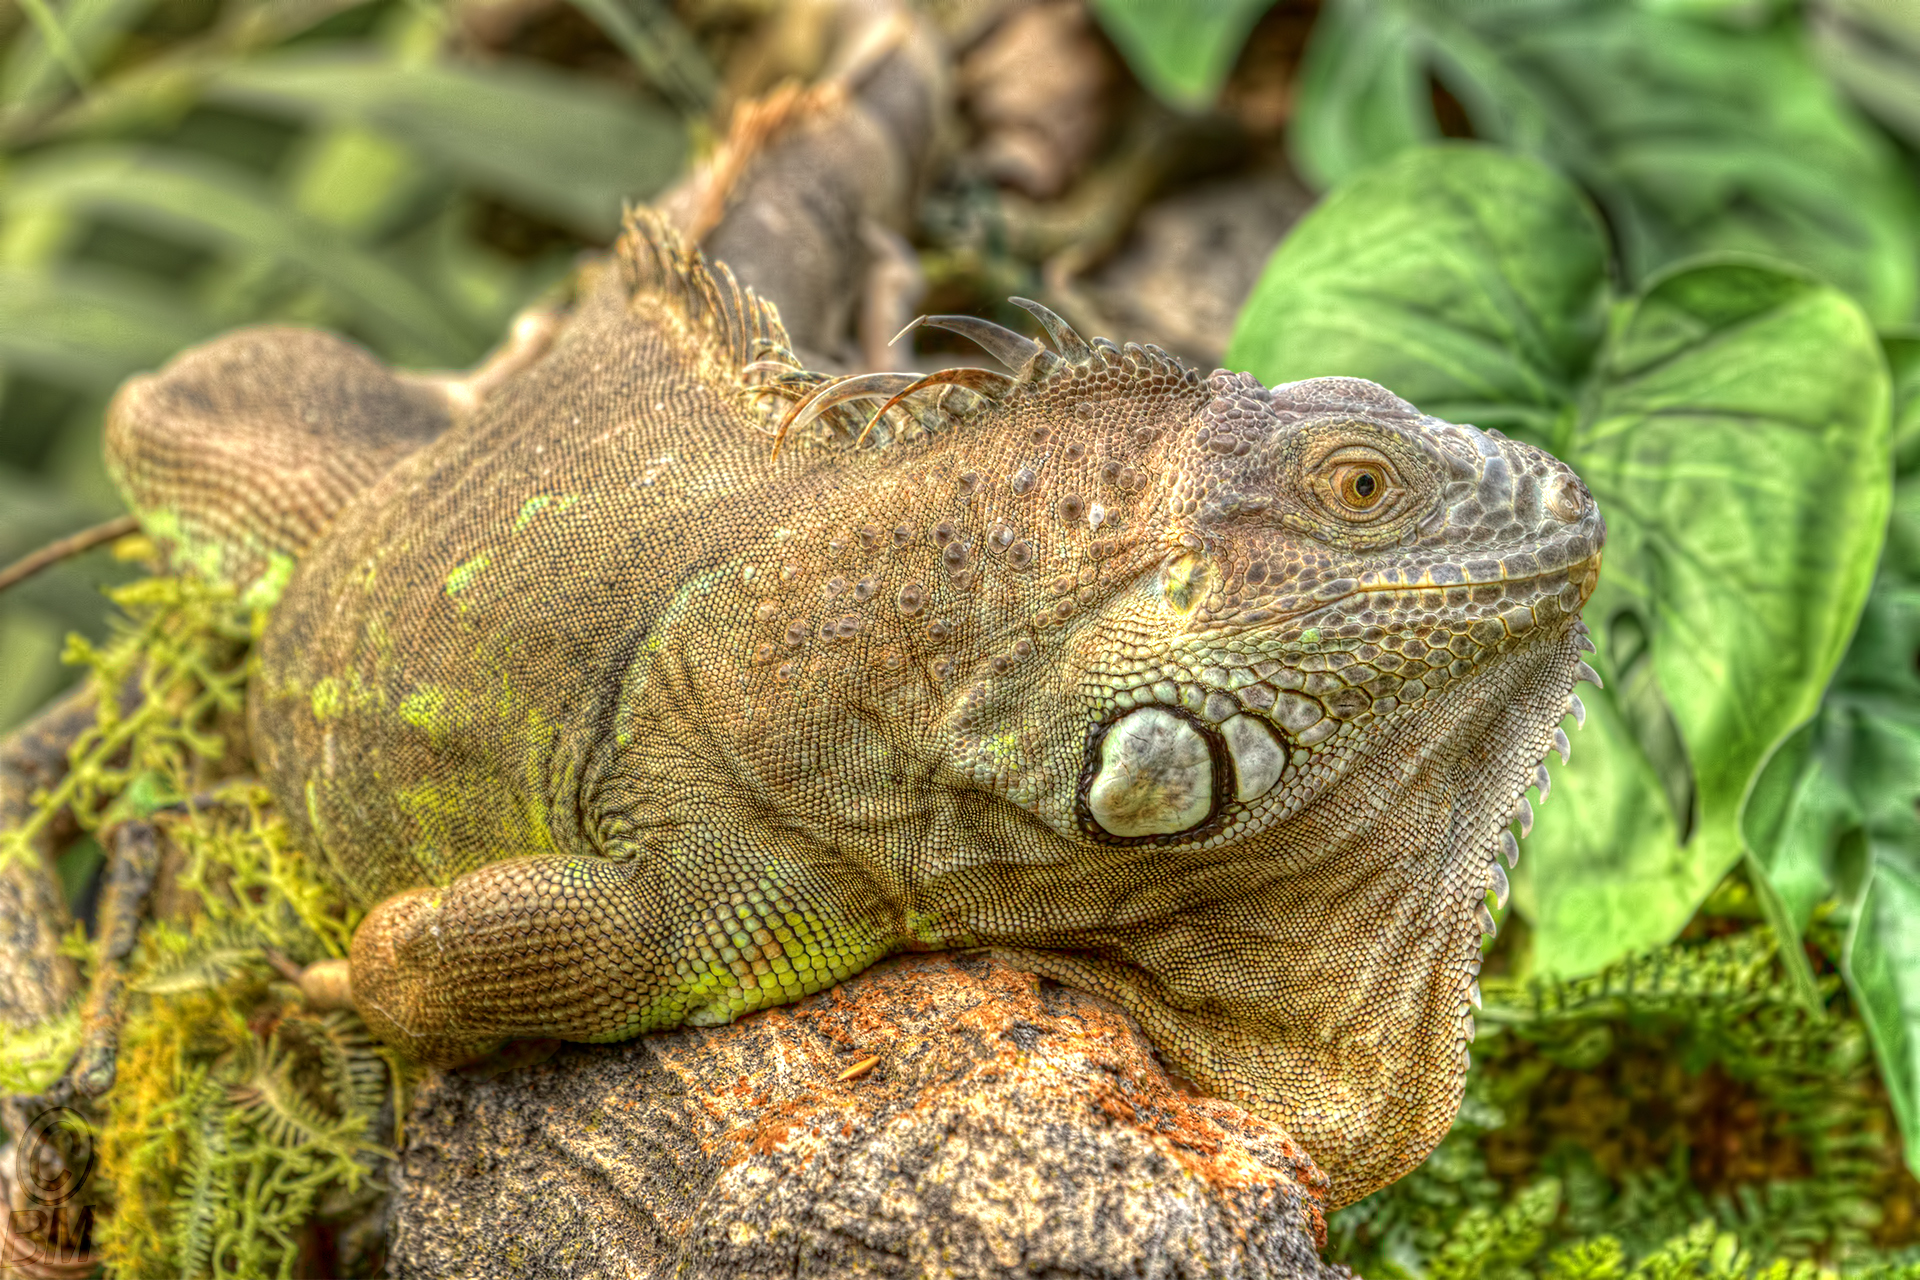 a lizard sitting on the rock of a leaf covered forest